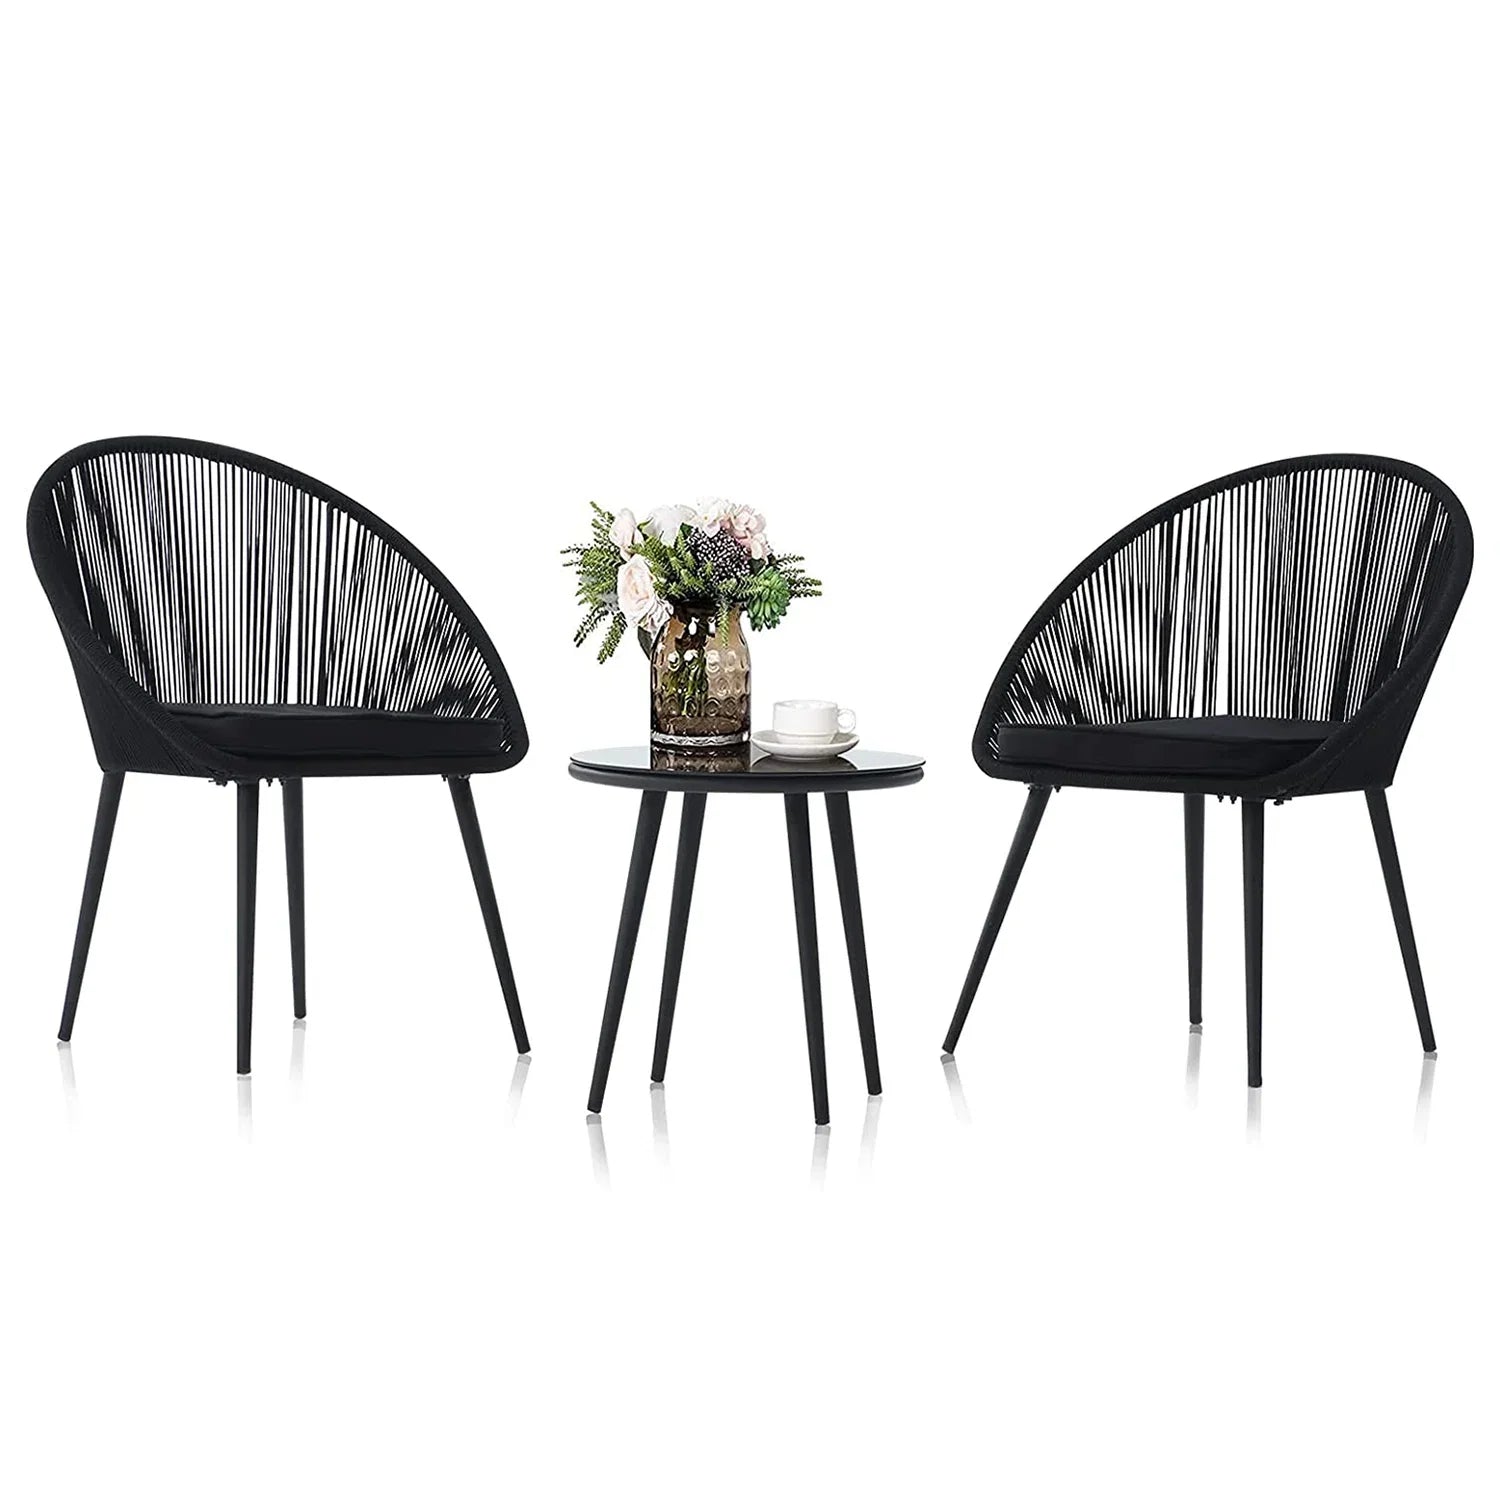 OUTDOOR PATIO SEATING SET 2 CHAIRS AND 1 TABLE SET (BLACK)